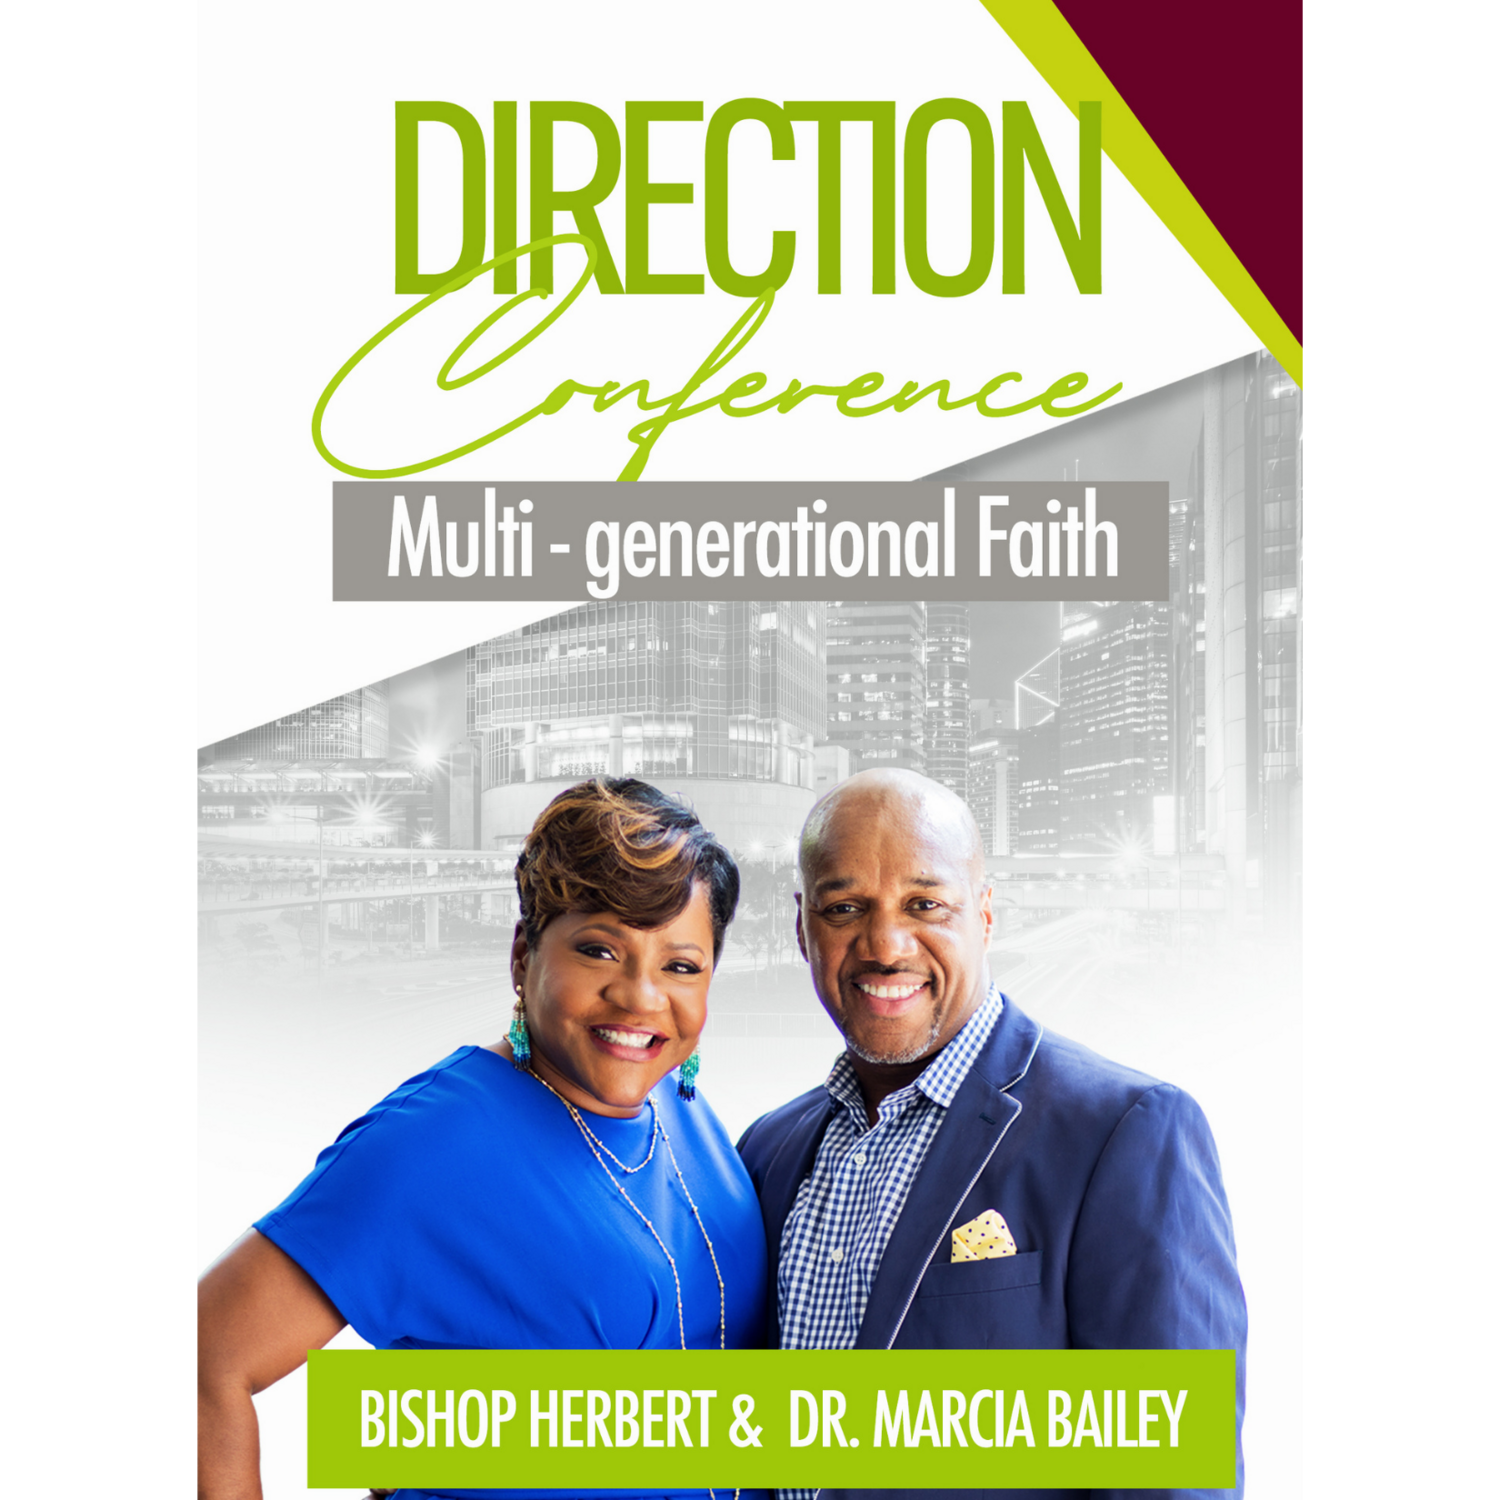 Direction Conference 2021 - MP3 Series